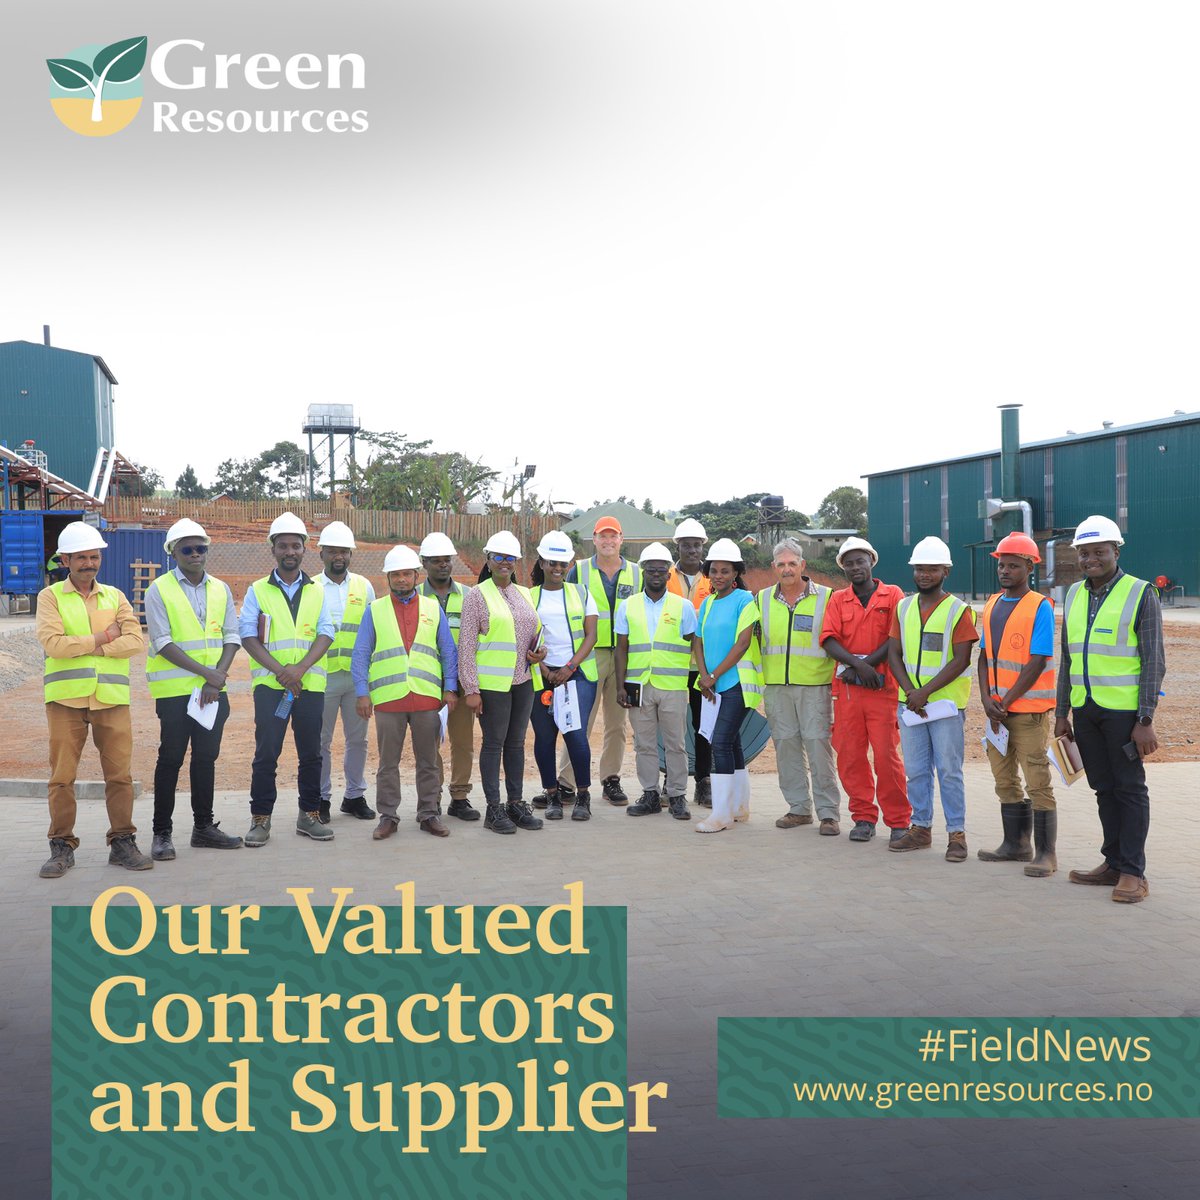 Our Trusted Contractors and Suppliers 🤝 More than 2/3 of our operations are possible through the efforts of our third-party contractors & suppliers. We regularly conduct meetings with them to discuss our operations, plans, & procedures. #GreenResources #Sustainability